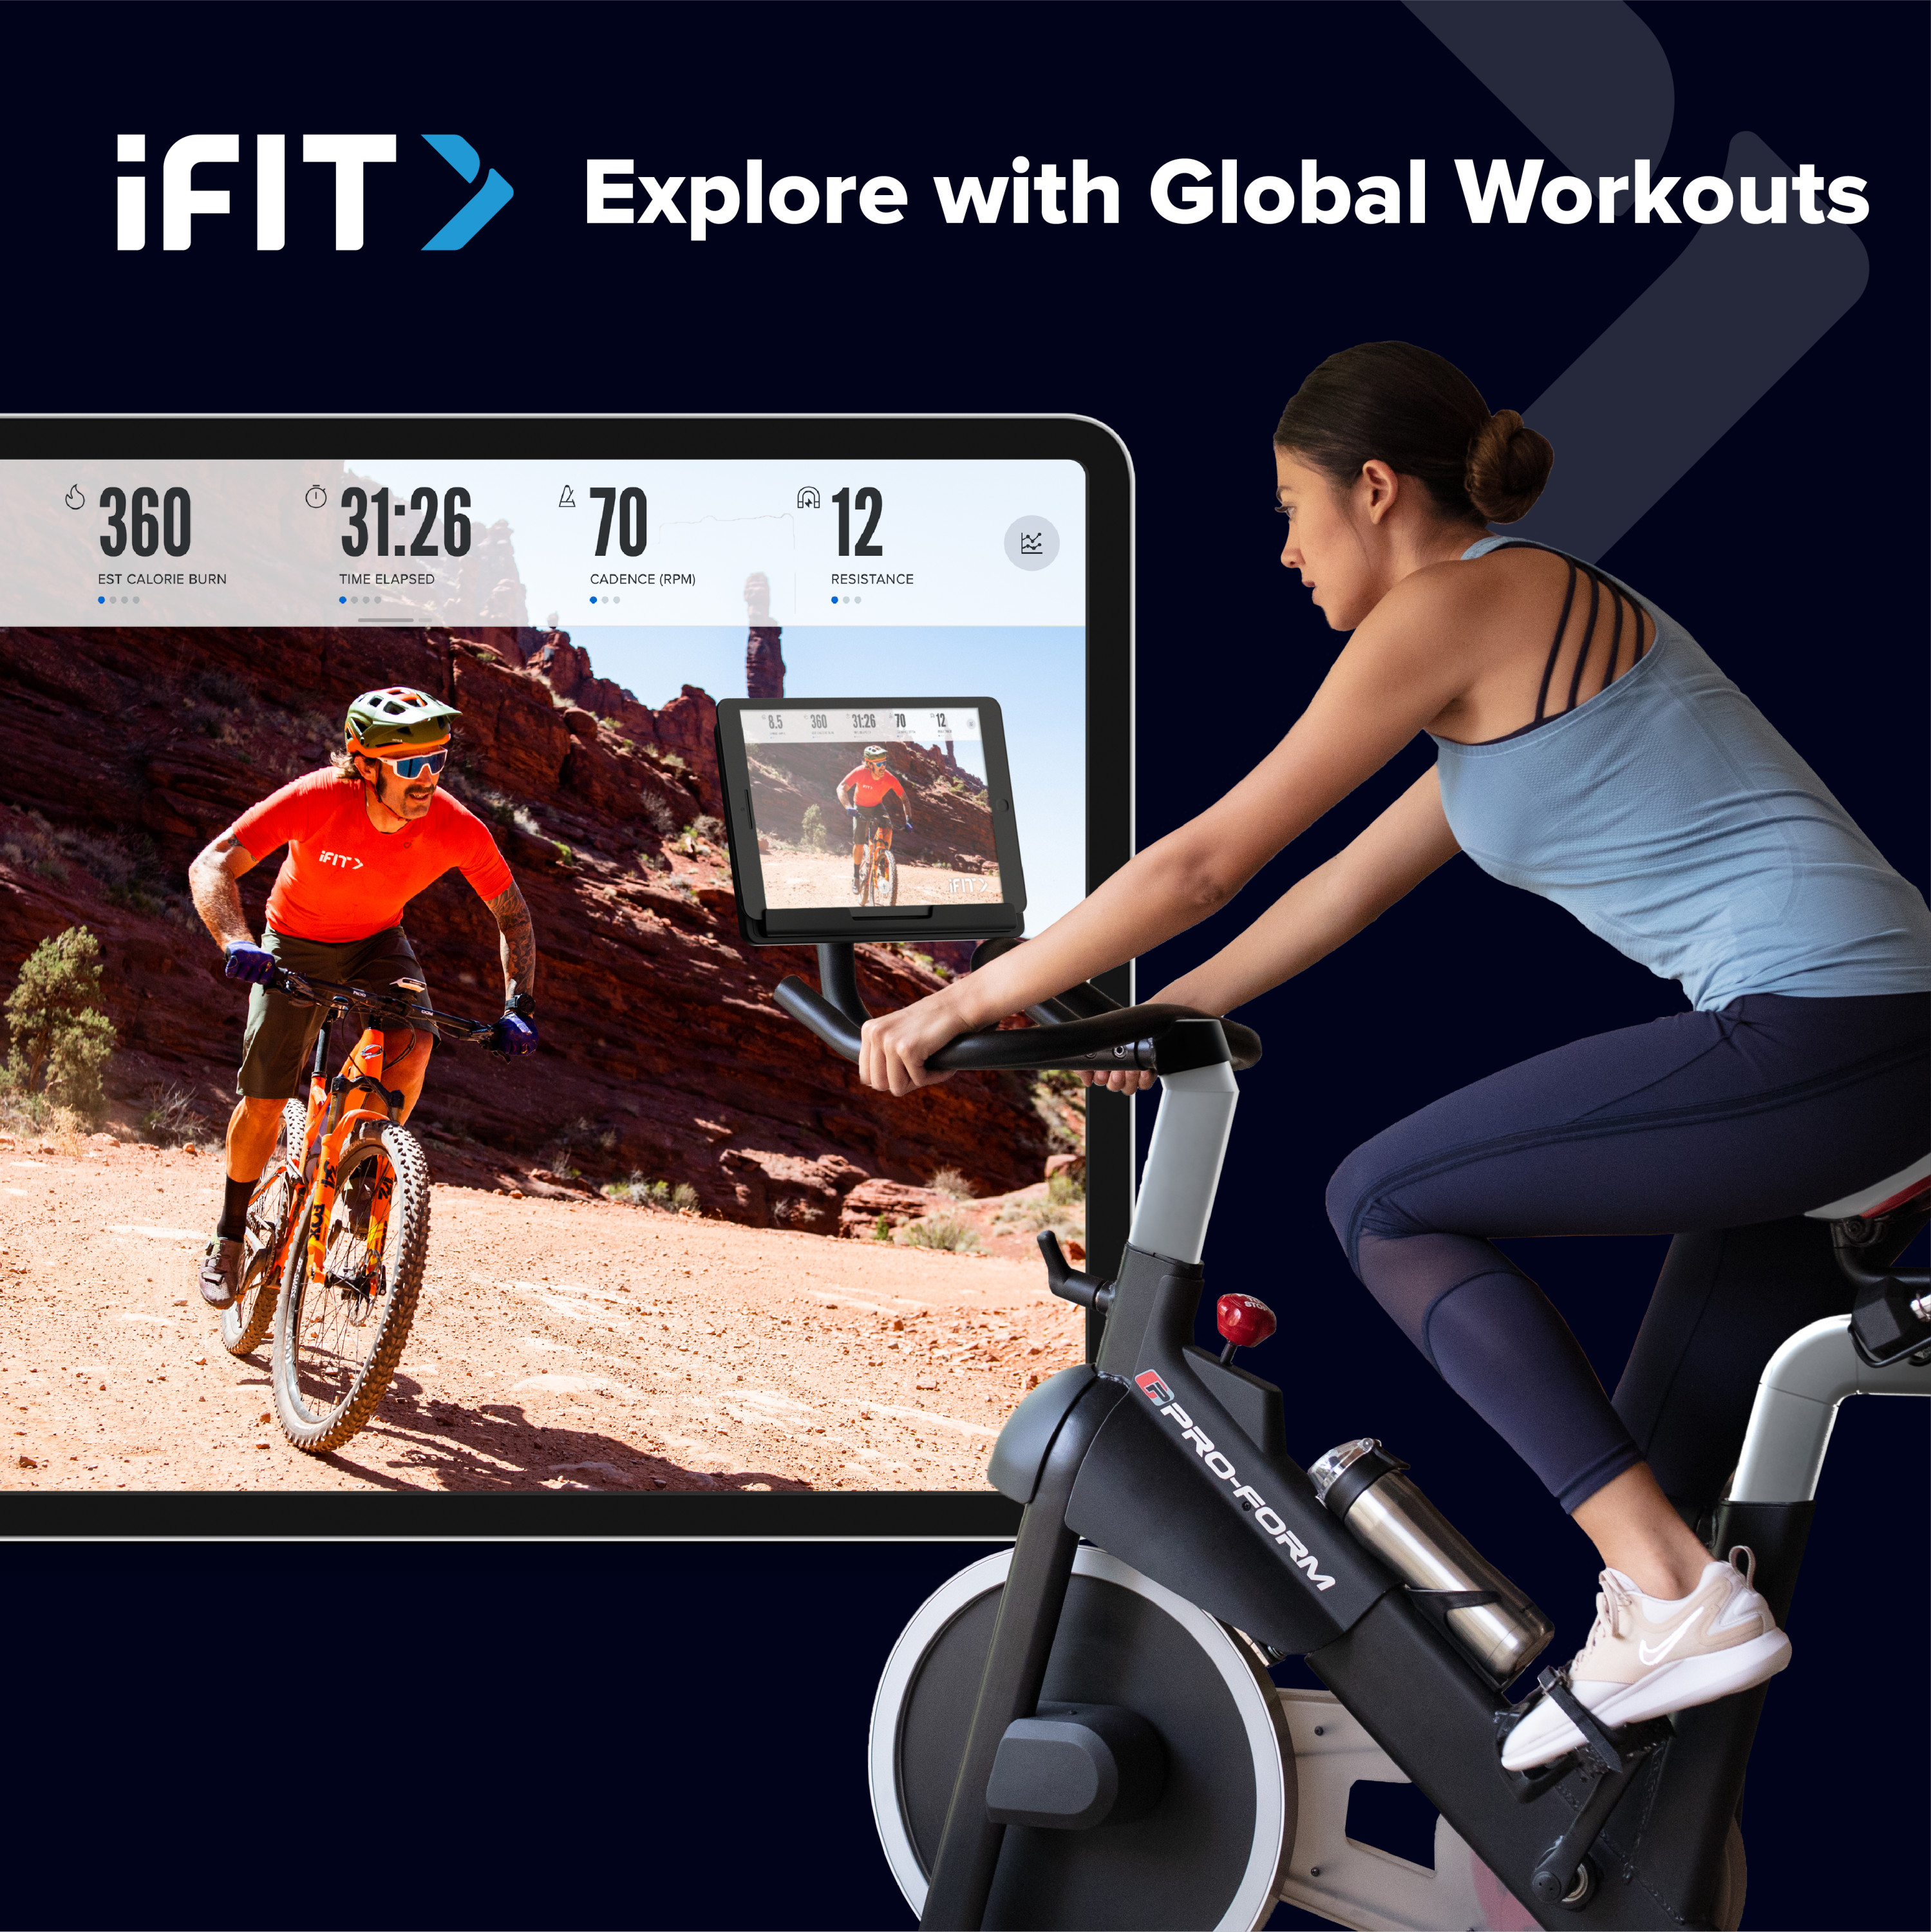 ProForm Carbon CX Exercise Bike with 3 Lb Dumbbell Set and 30-Day iFIT Membership - image 4 of 26